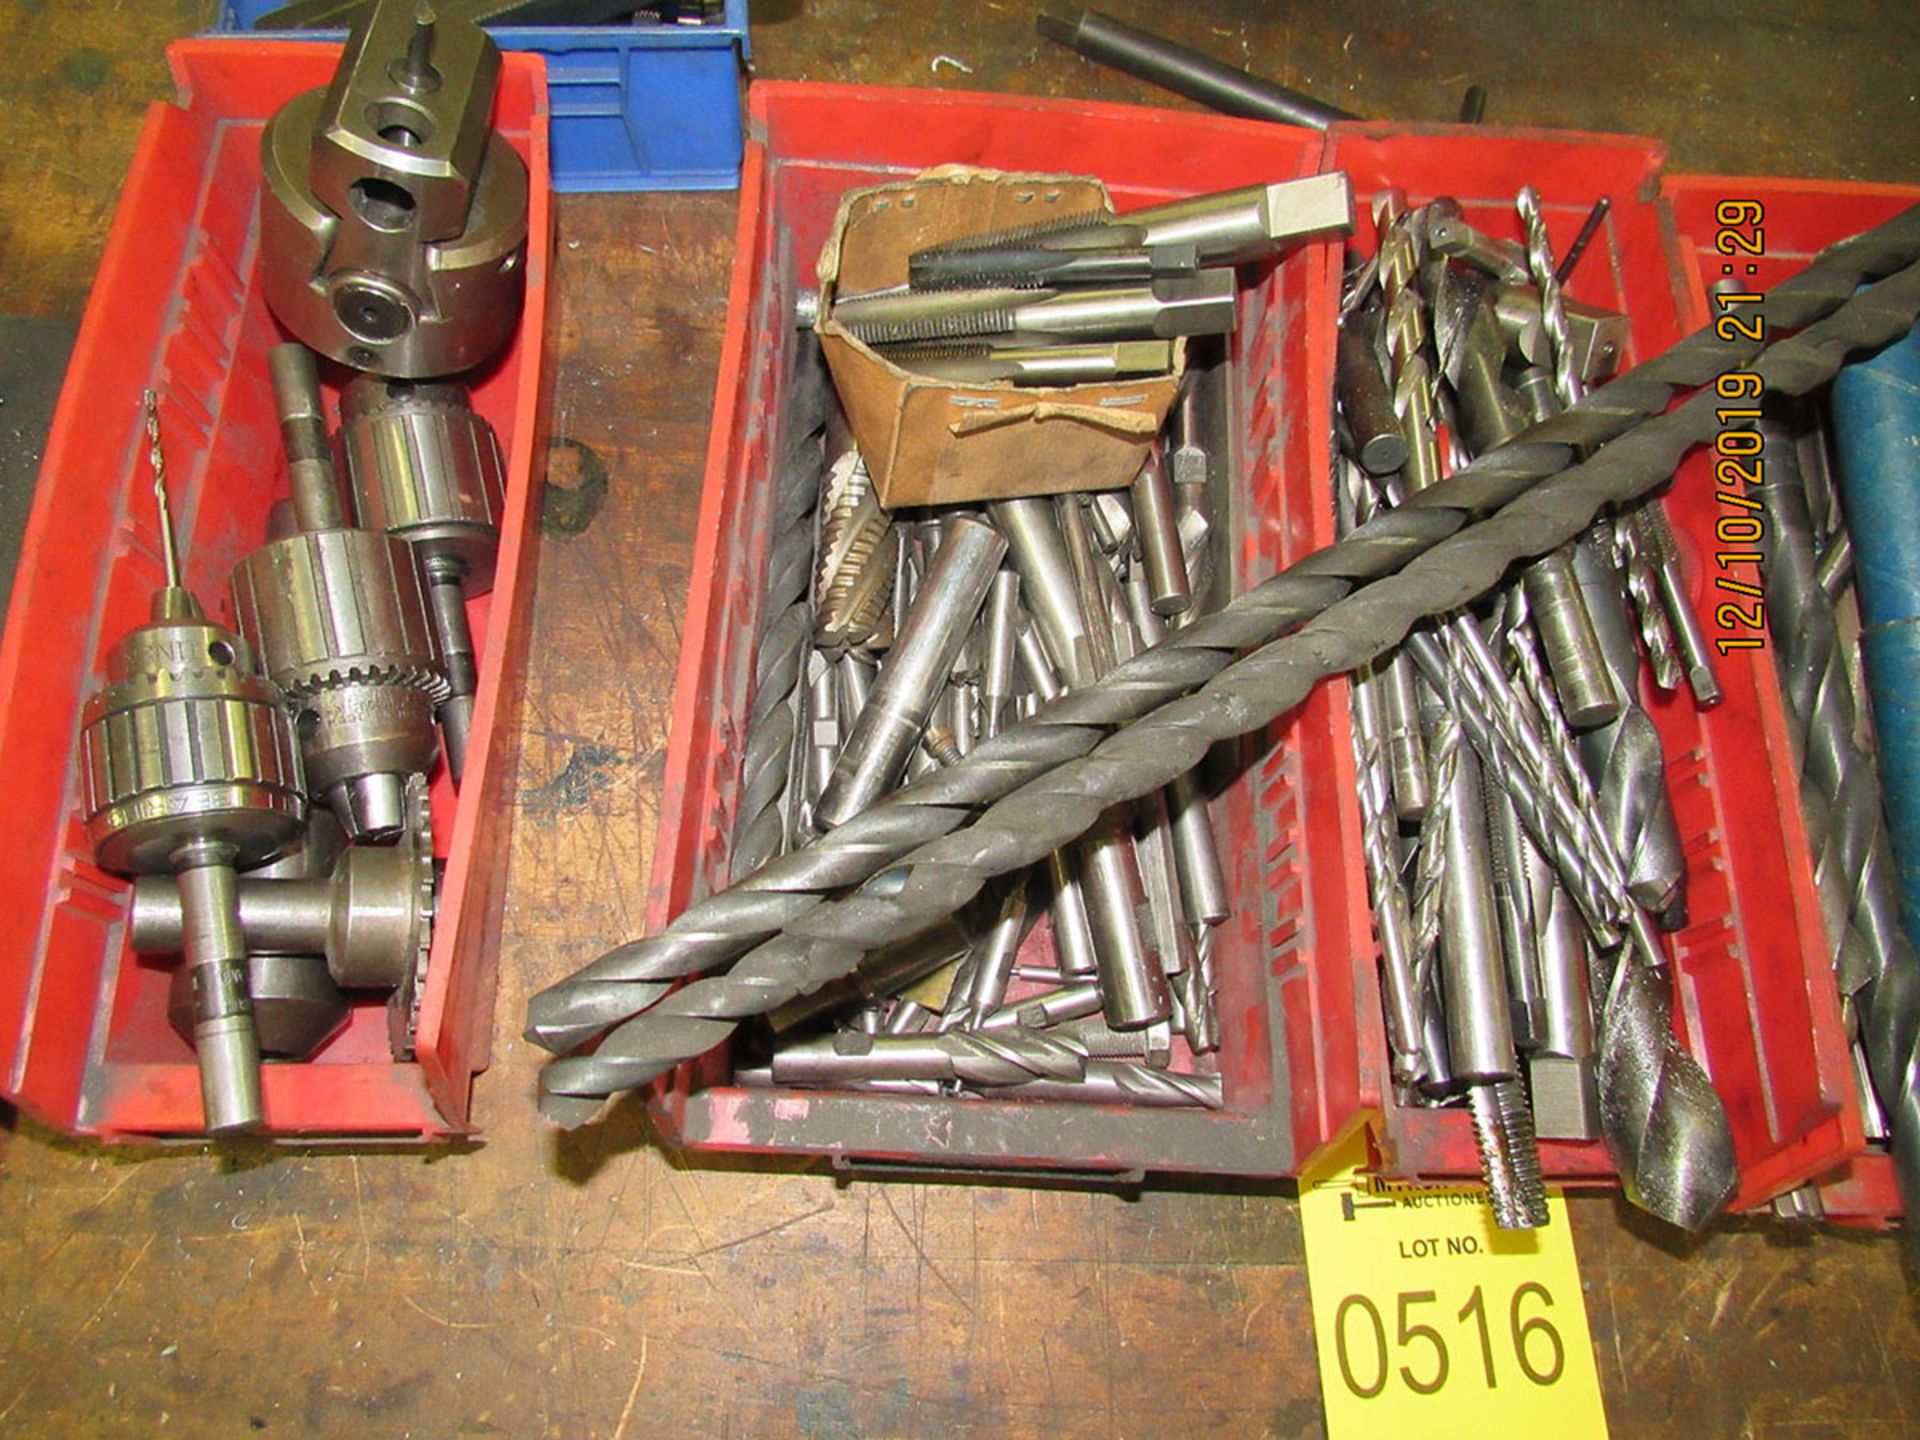 LOT OF CHUCKS, COLLETS, AND DRILL BITS - Image 3 of 5